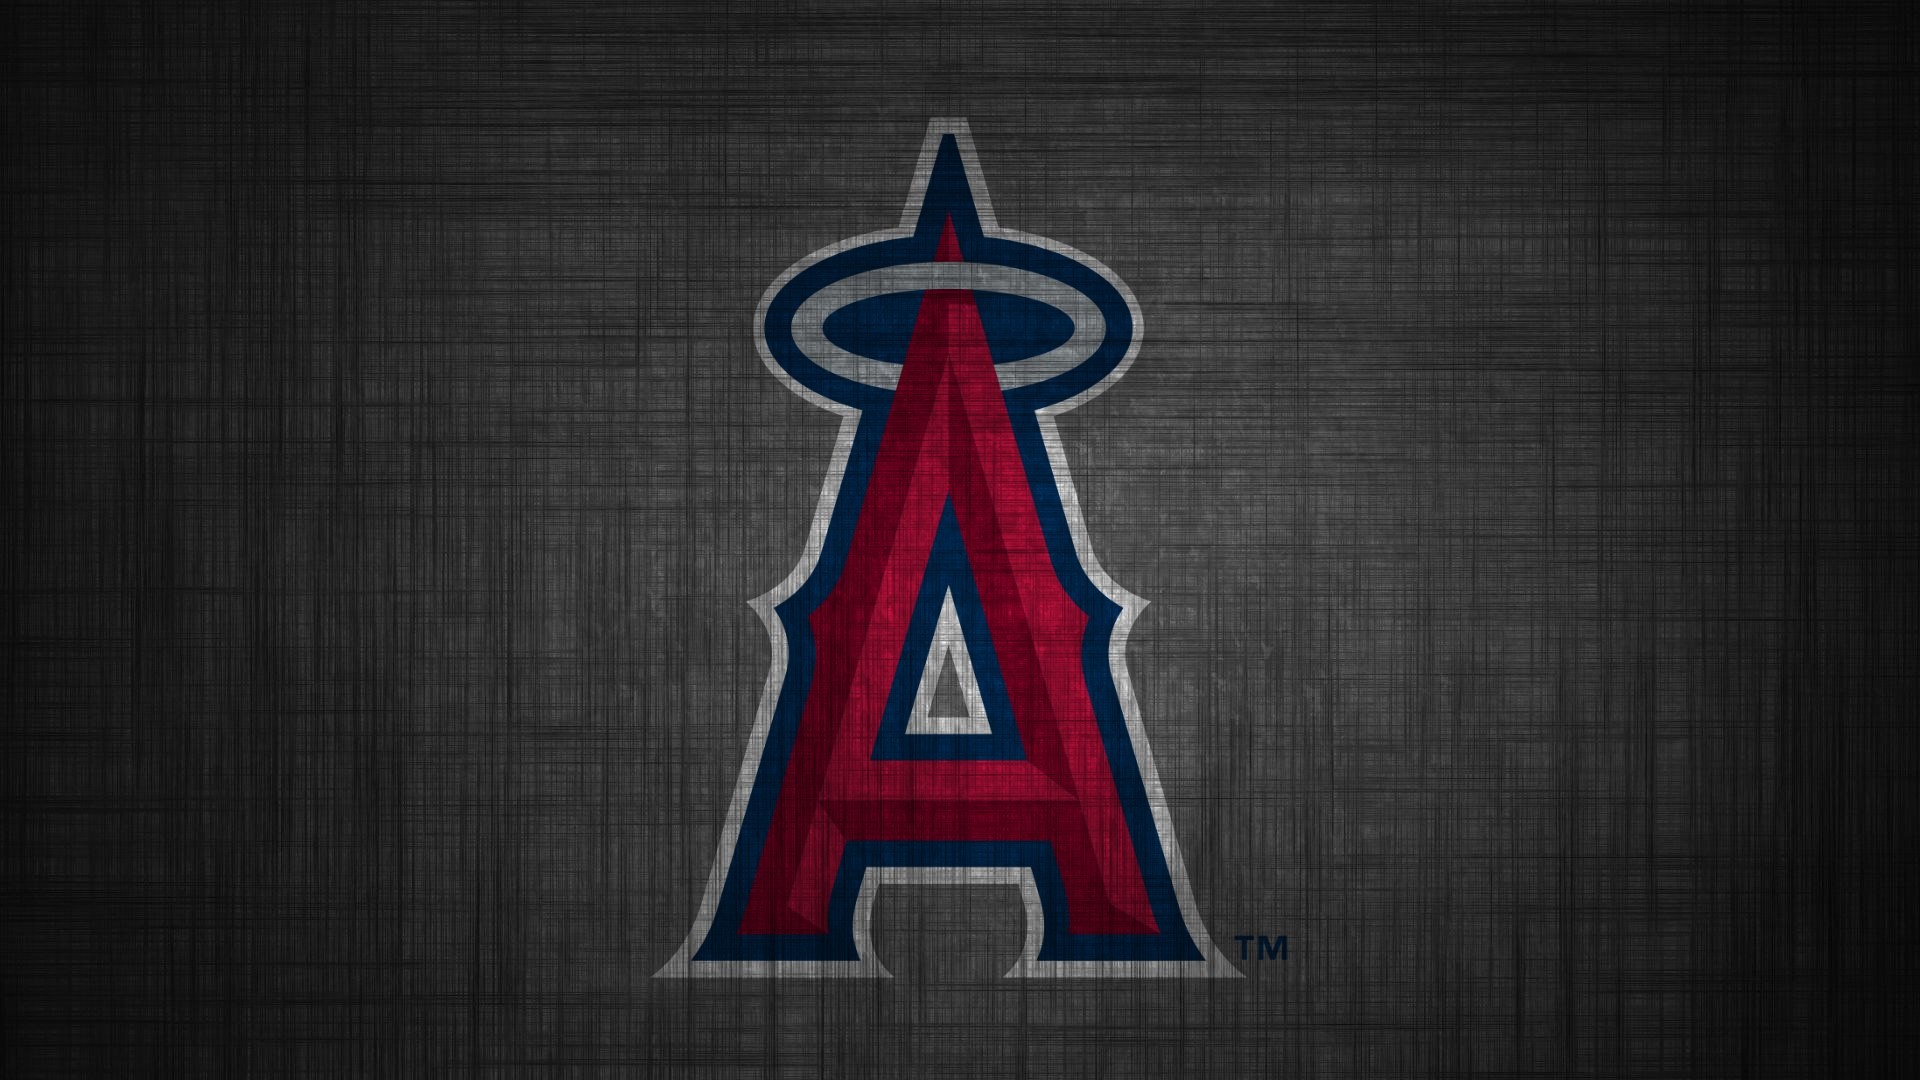 1920x1080 los angeles angels iphone wallpaper Account Suspended